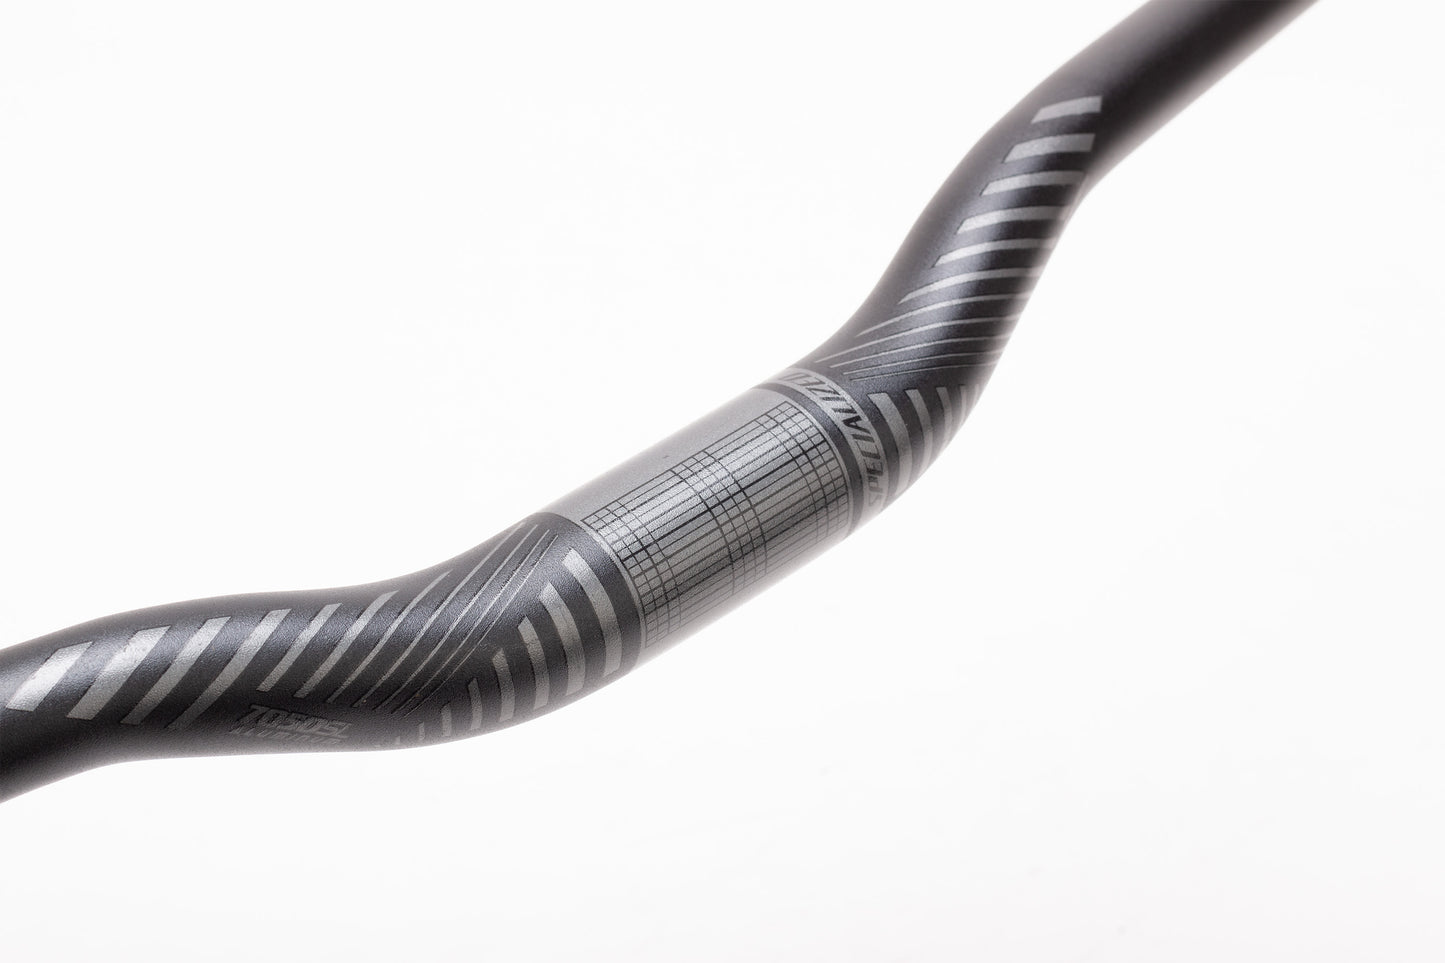 Specialized Alloy Low Rise Bar 31.8x750mm Char (OS)